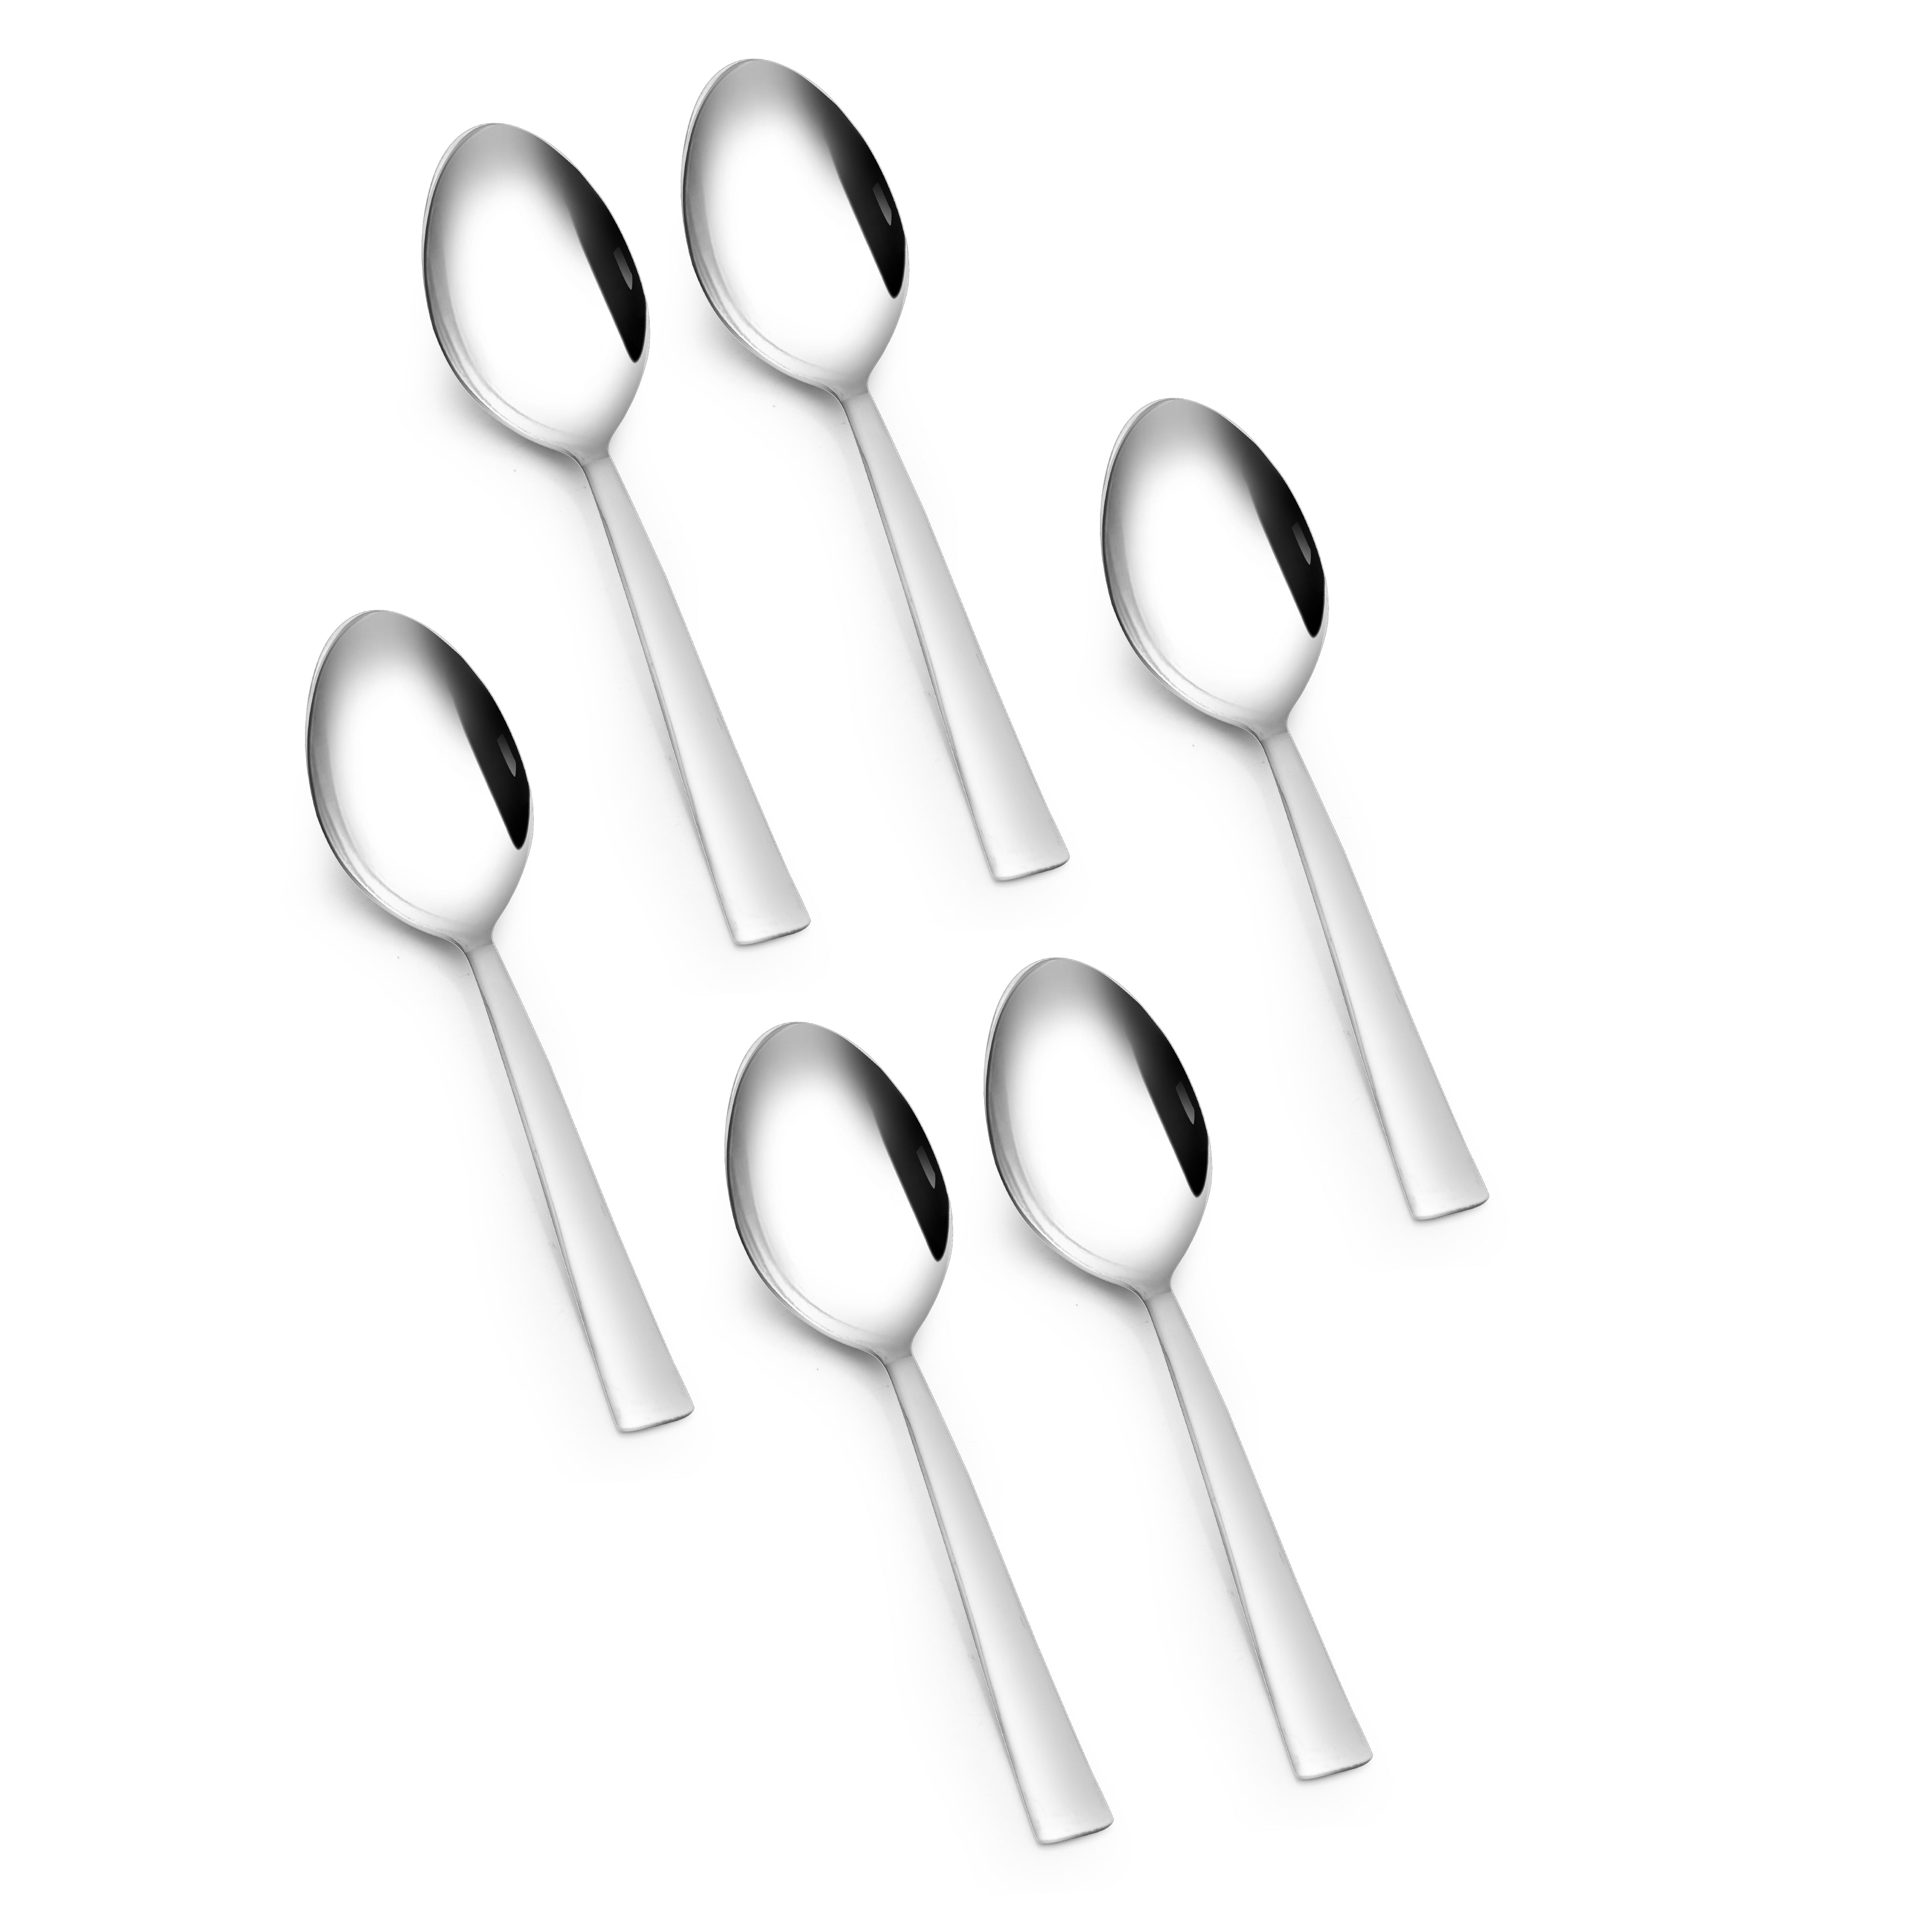 Arias Fiesta Cutlery Set of 24 With Stand (Silver)